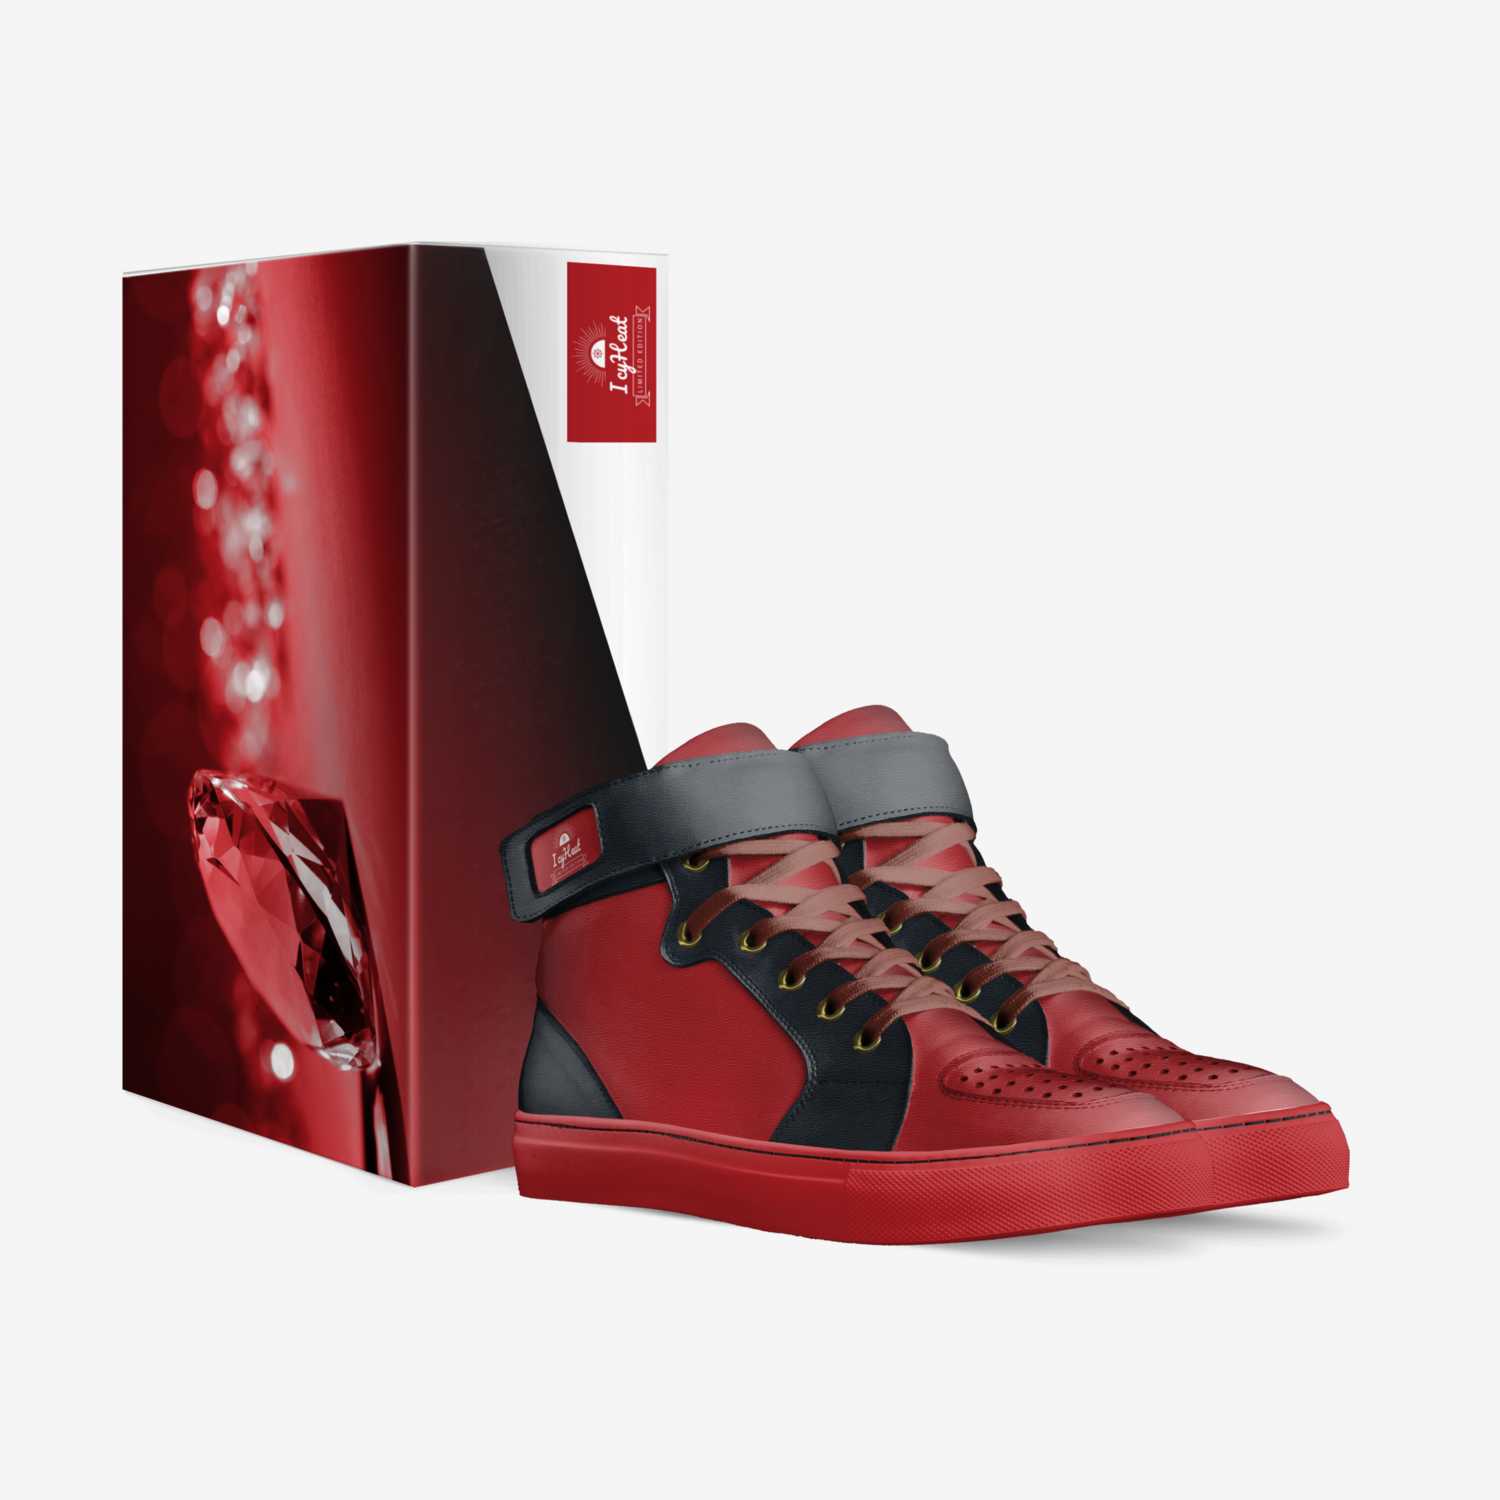 IcyHeat custom made in Italy shoes by Cohen Butler | Box view